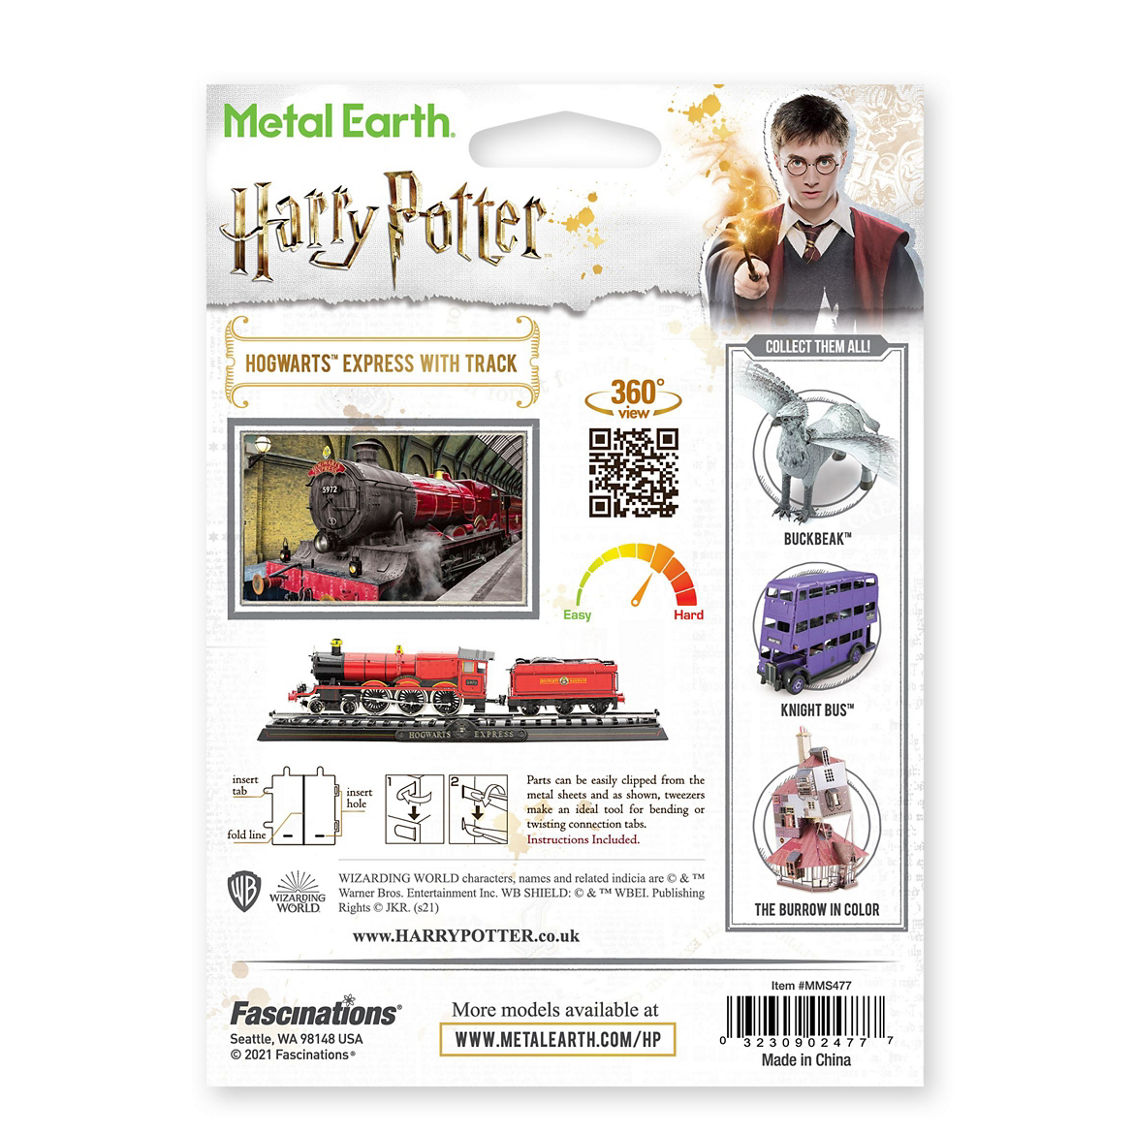 Fascinations Metal Earth 3D Model Kit - Harry Potter Hogwarts Express with Track - Image 3 of 5